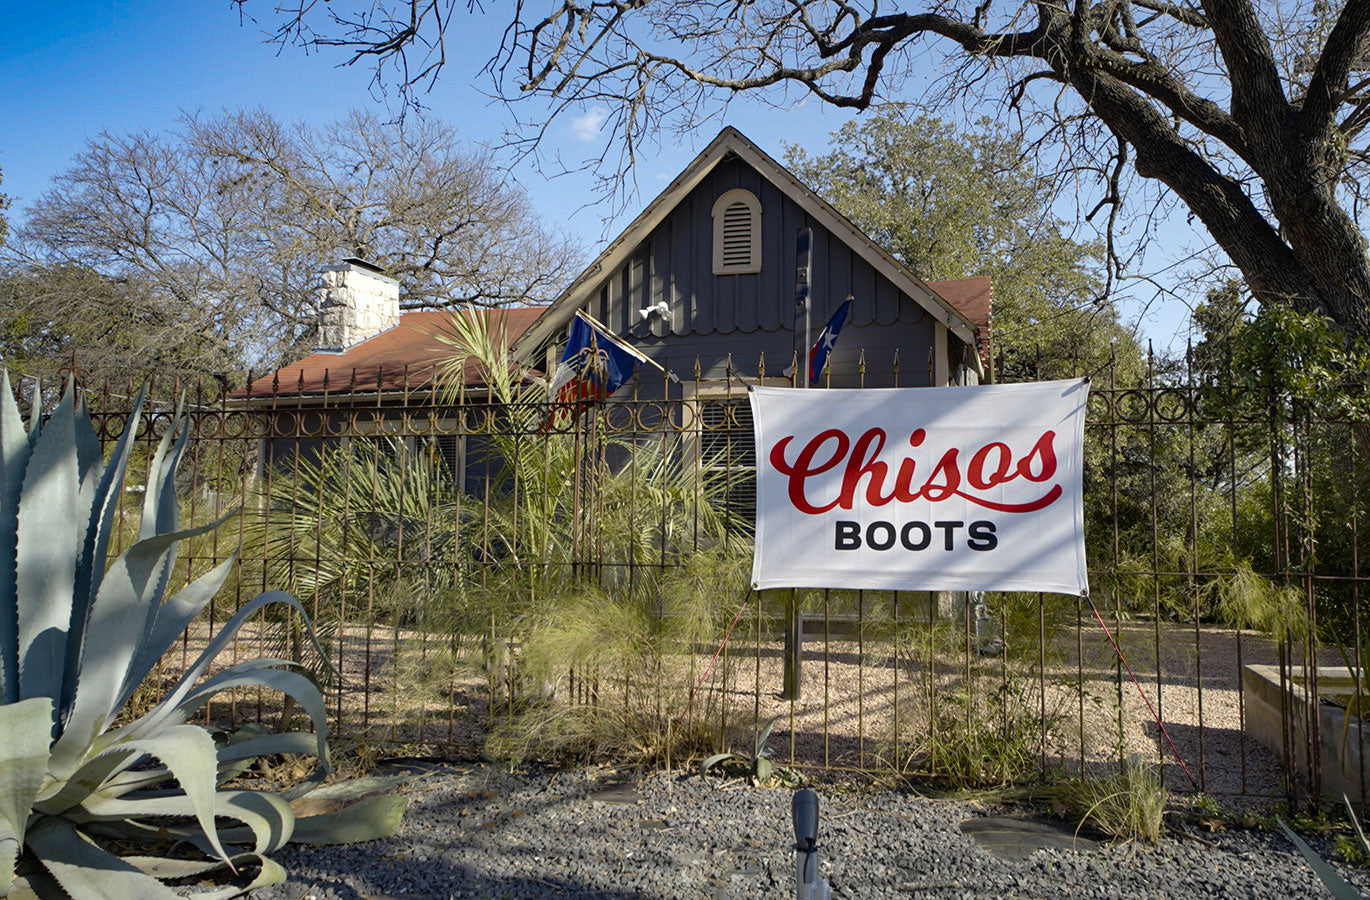 Comfortable Cowboy Boots Store in Austin Texas